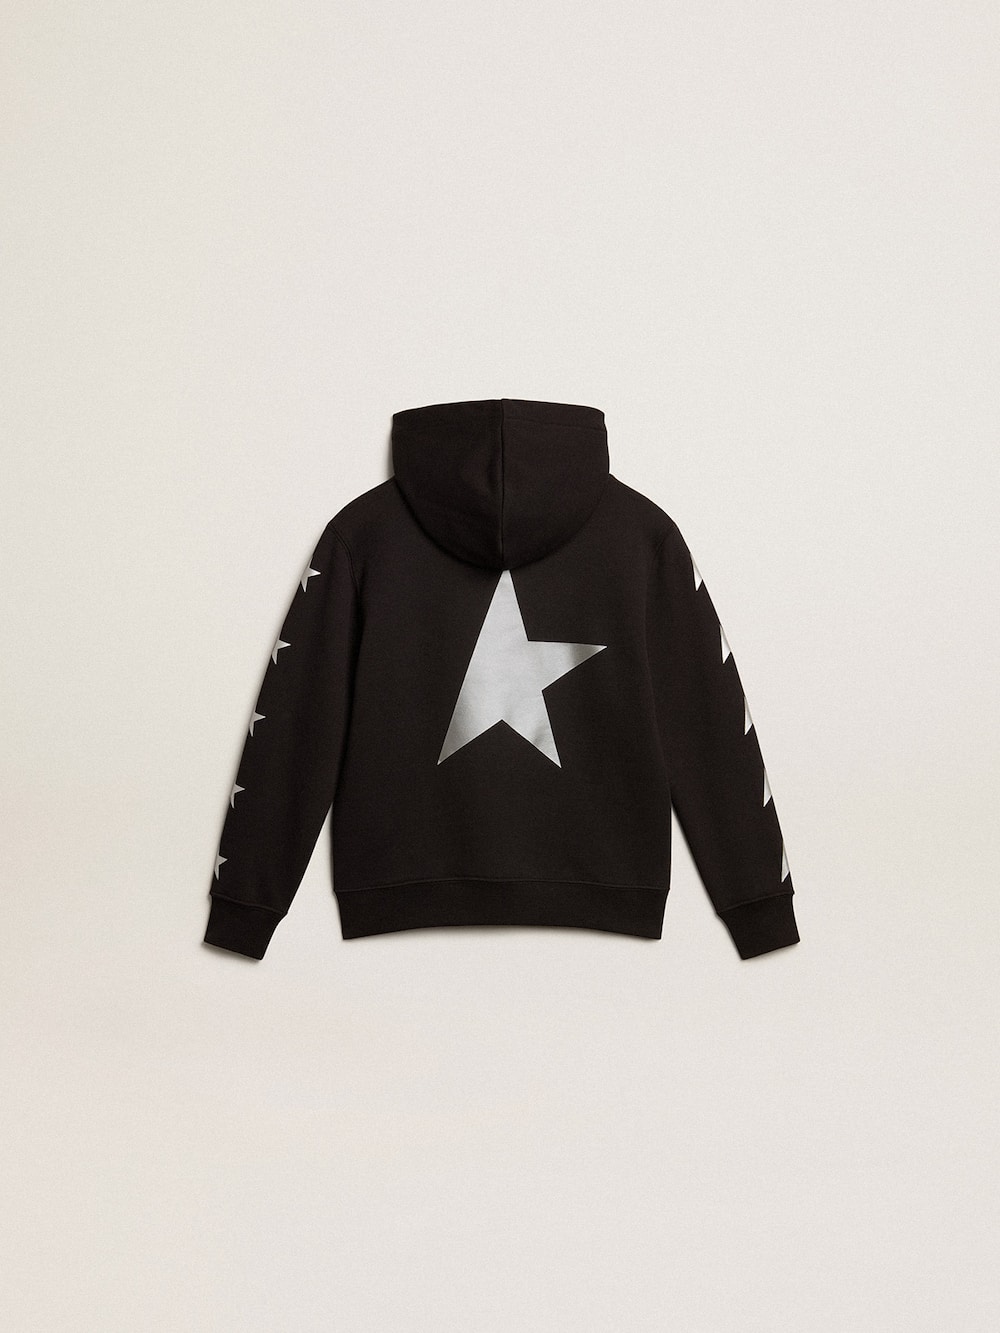 Golden Goose - Boys’ hooded sweatshirt in black with contrasting silver stars in 